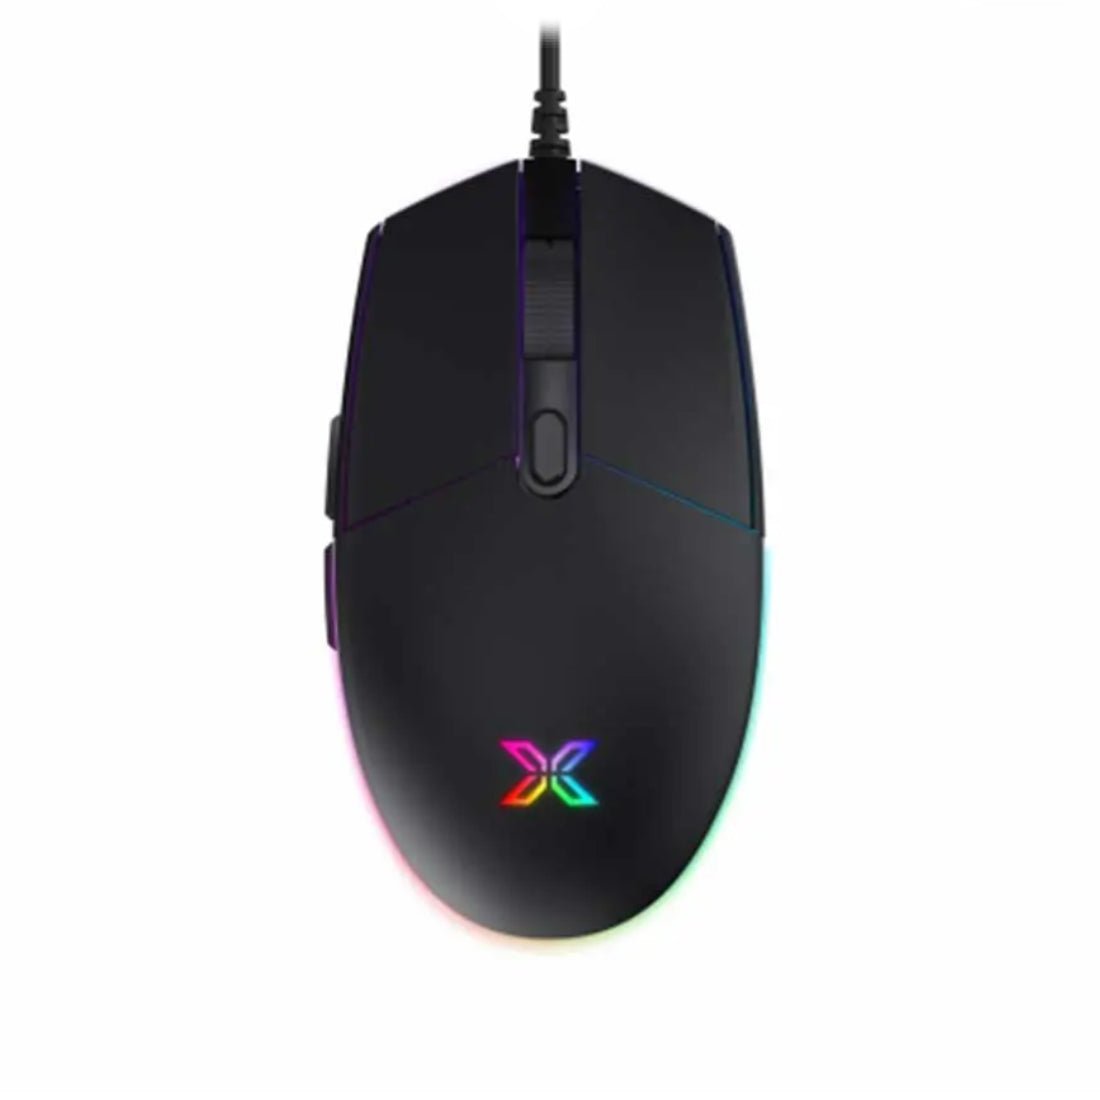 Xigmatek G1 RGB Wired Gaming Mouse - فأرة - Store 974 | ستور ٩٧٤